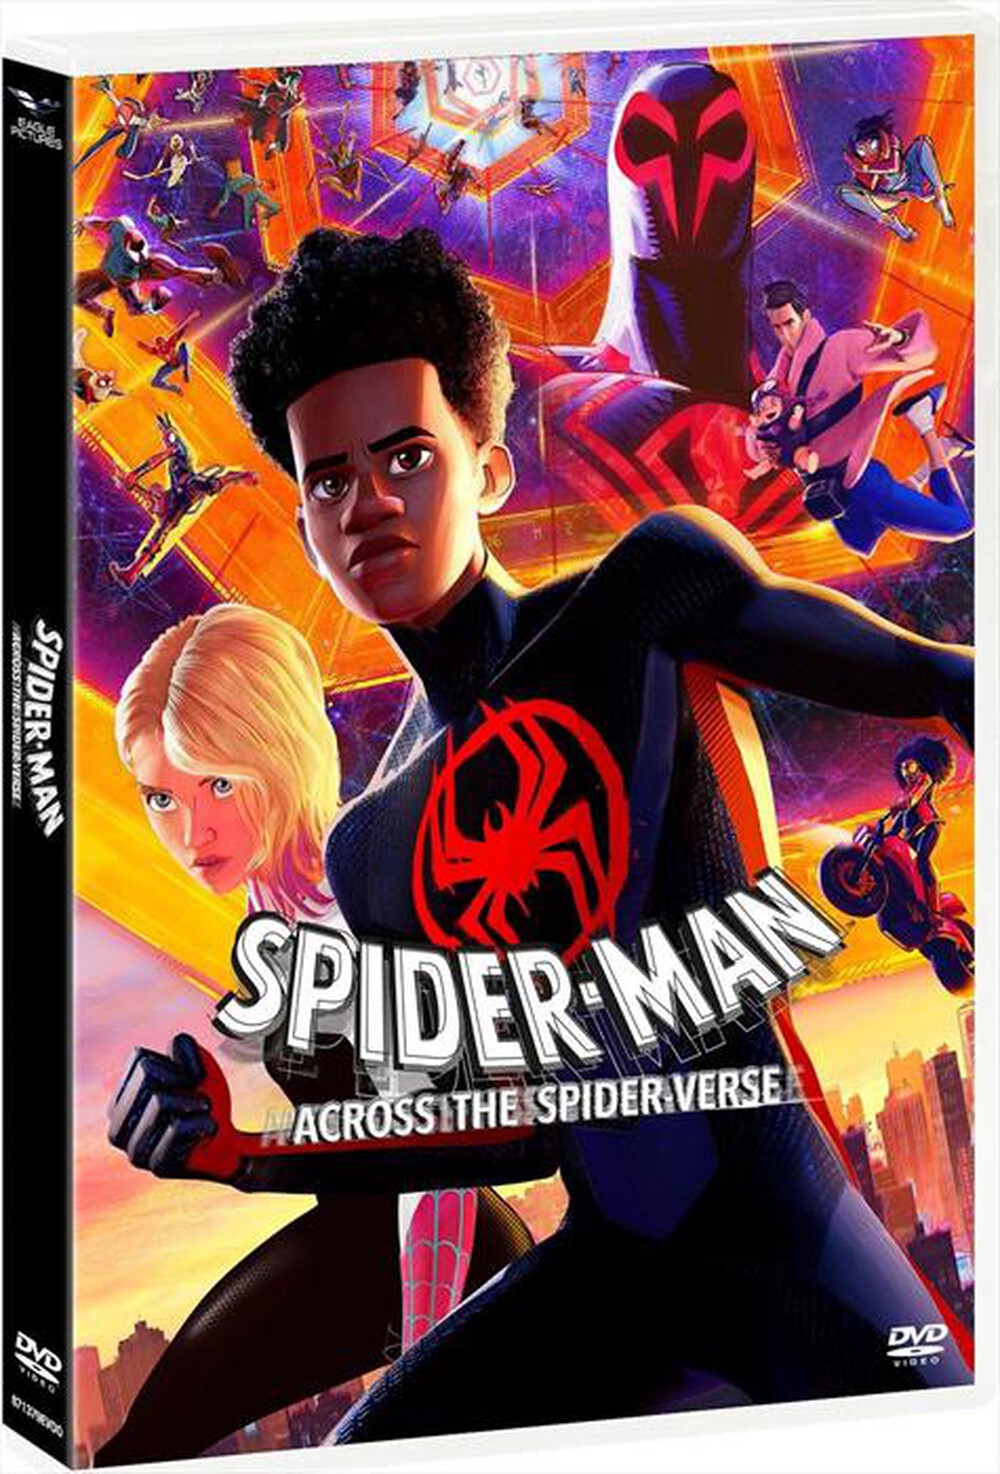 "SONY PICTURES - Spider-Man: Across The Spider-Verse (Dvd+Card)"